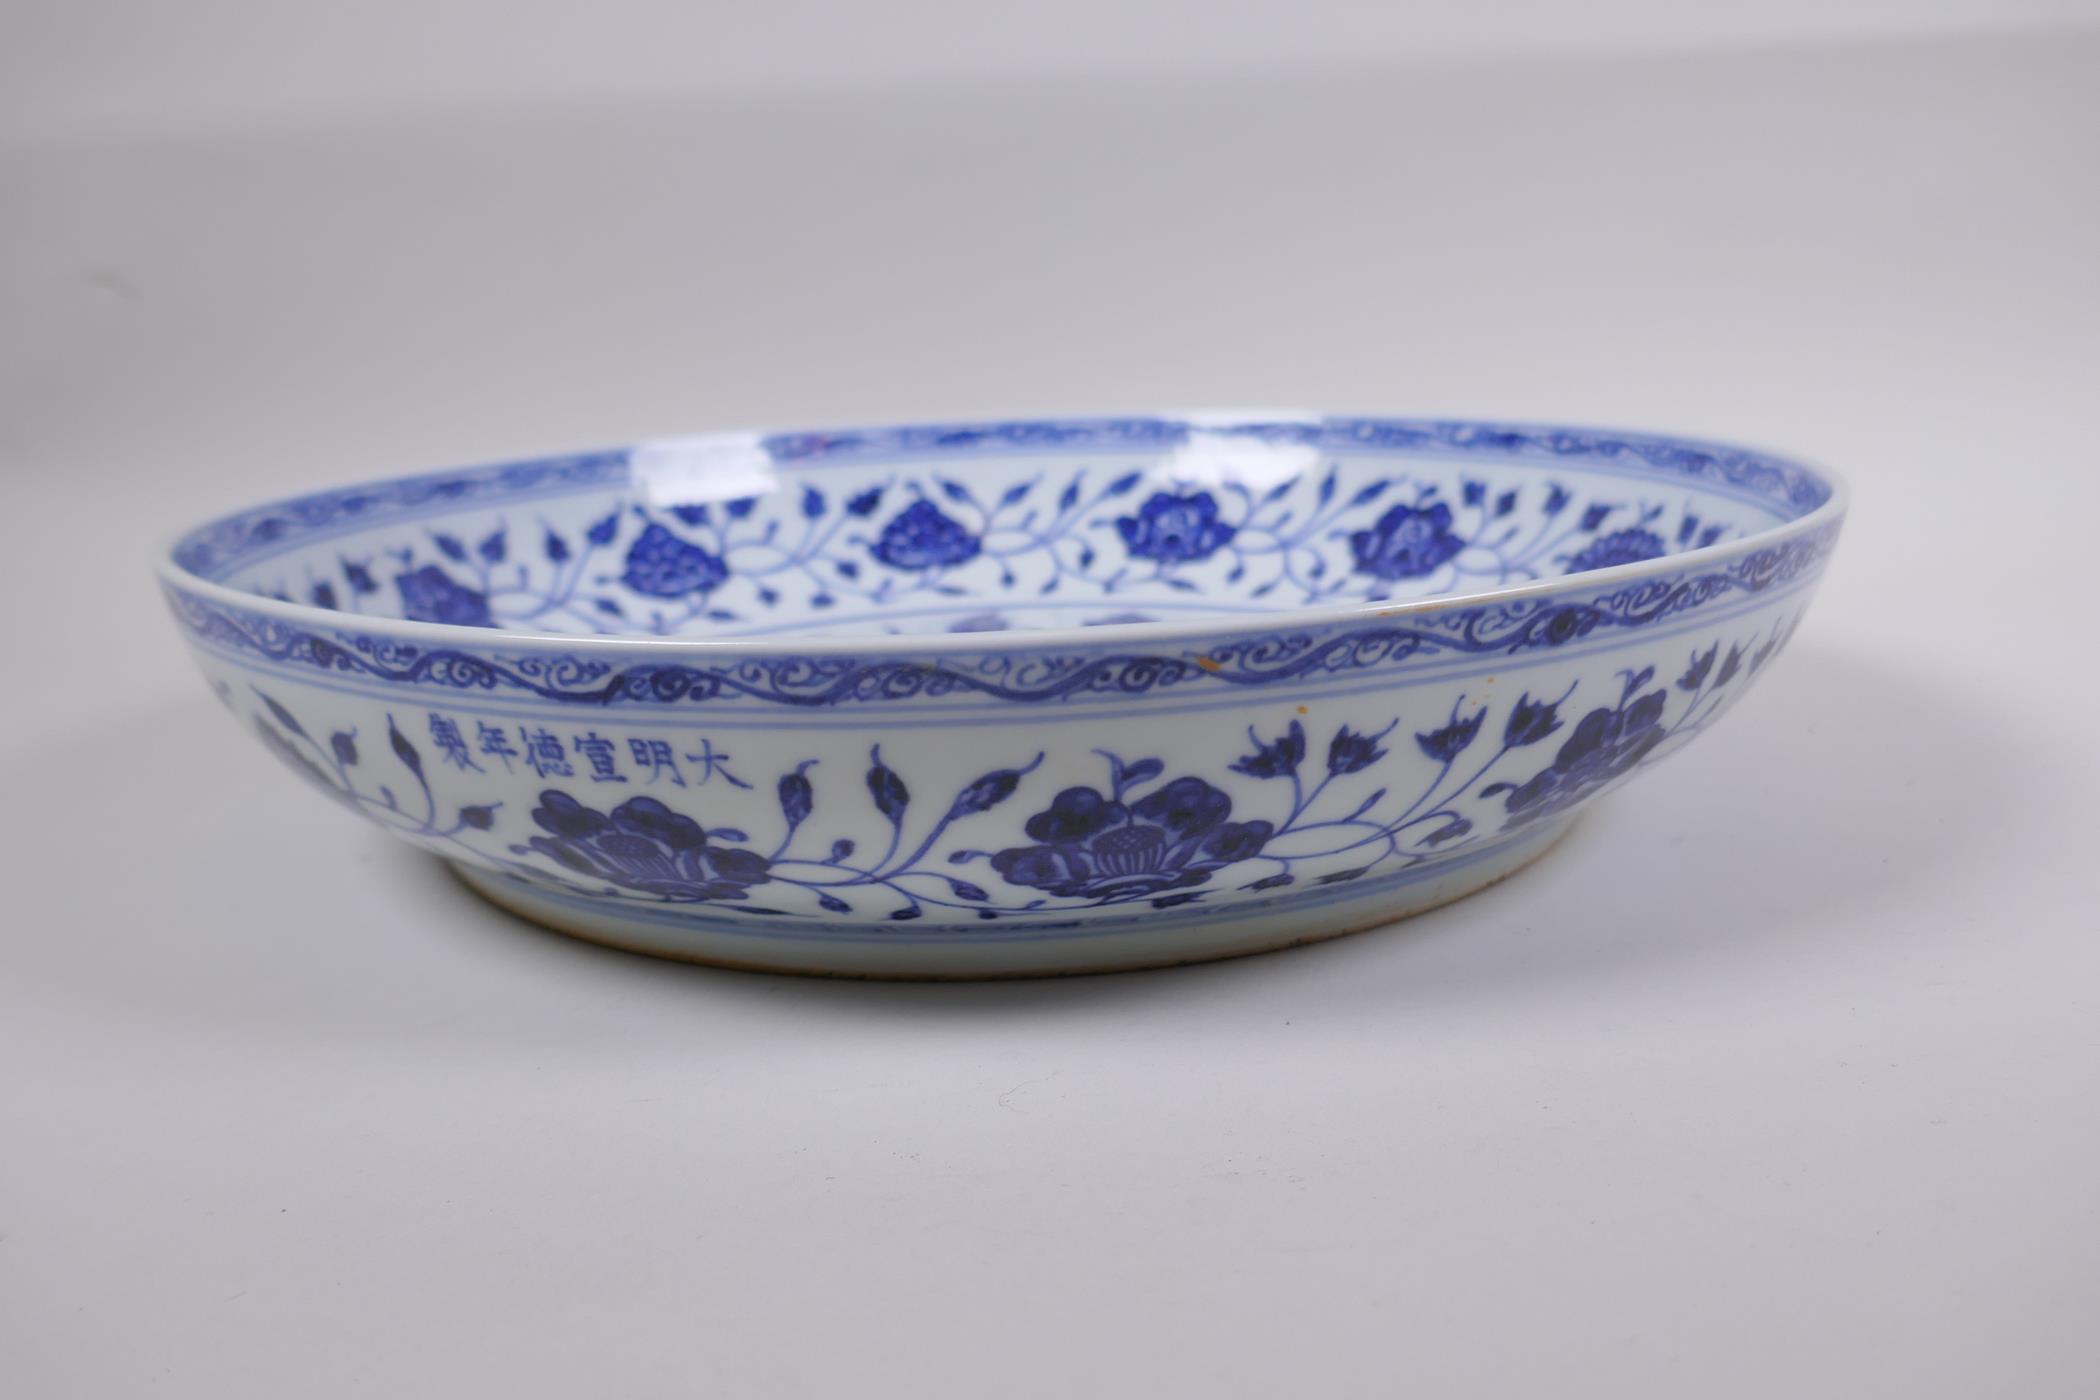 A blue and white porcelain charger with lotus flower decoration, Chinese Xuande 6 character mark - Image 3 of 5